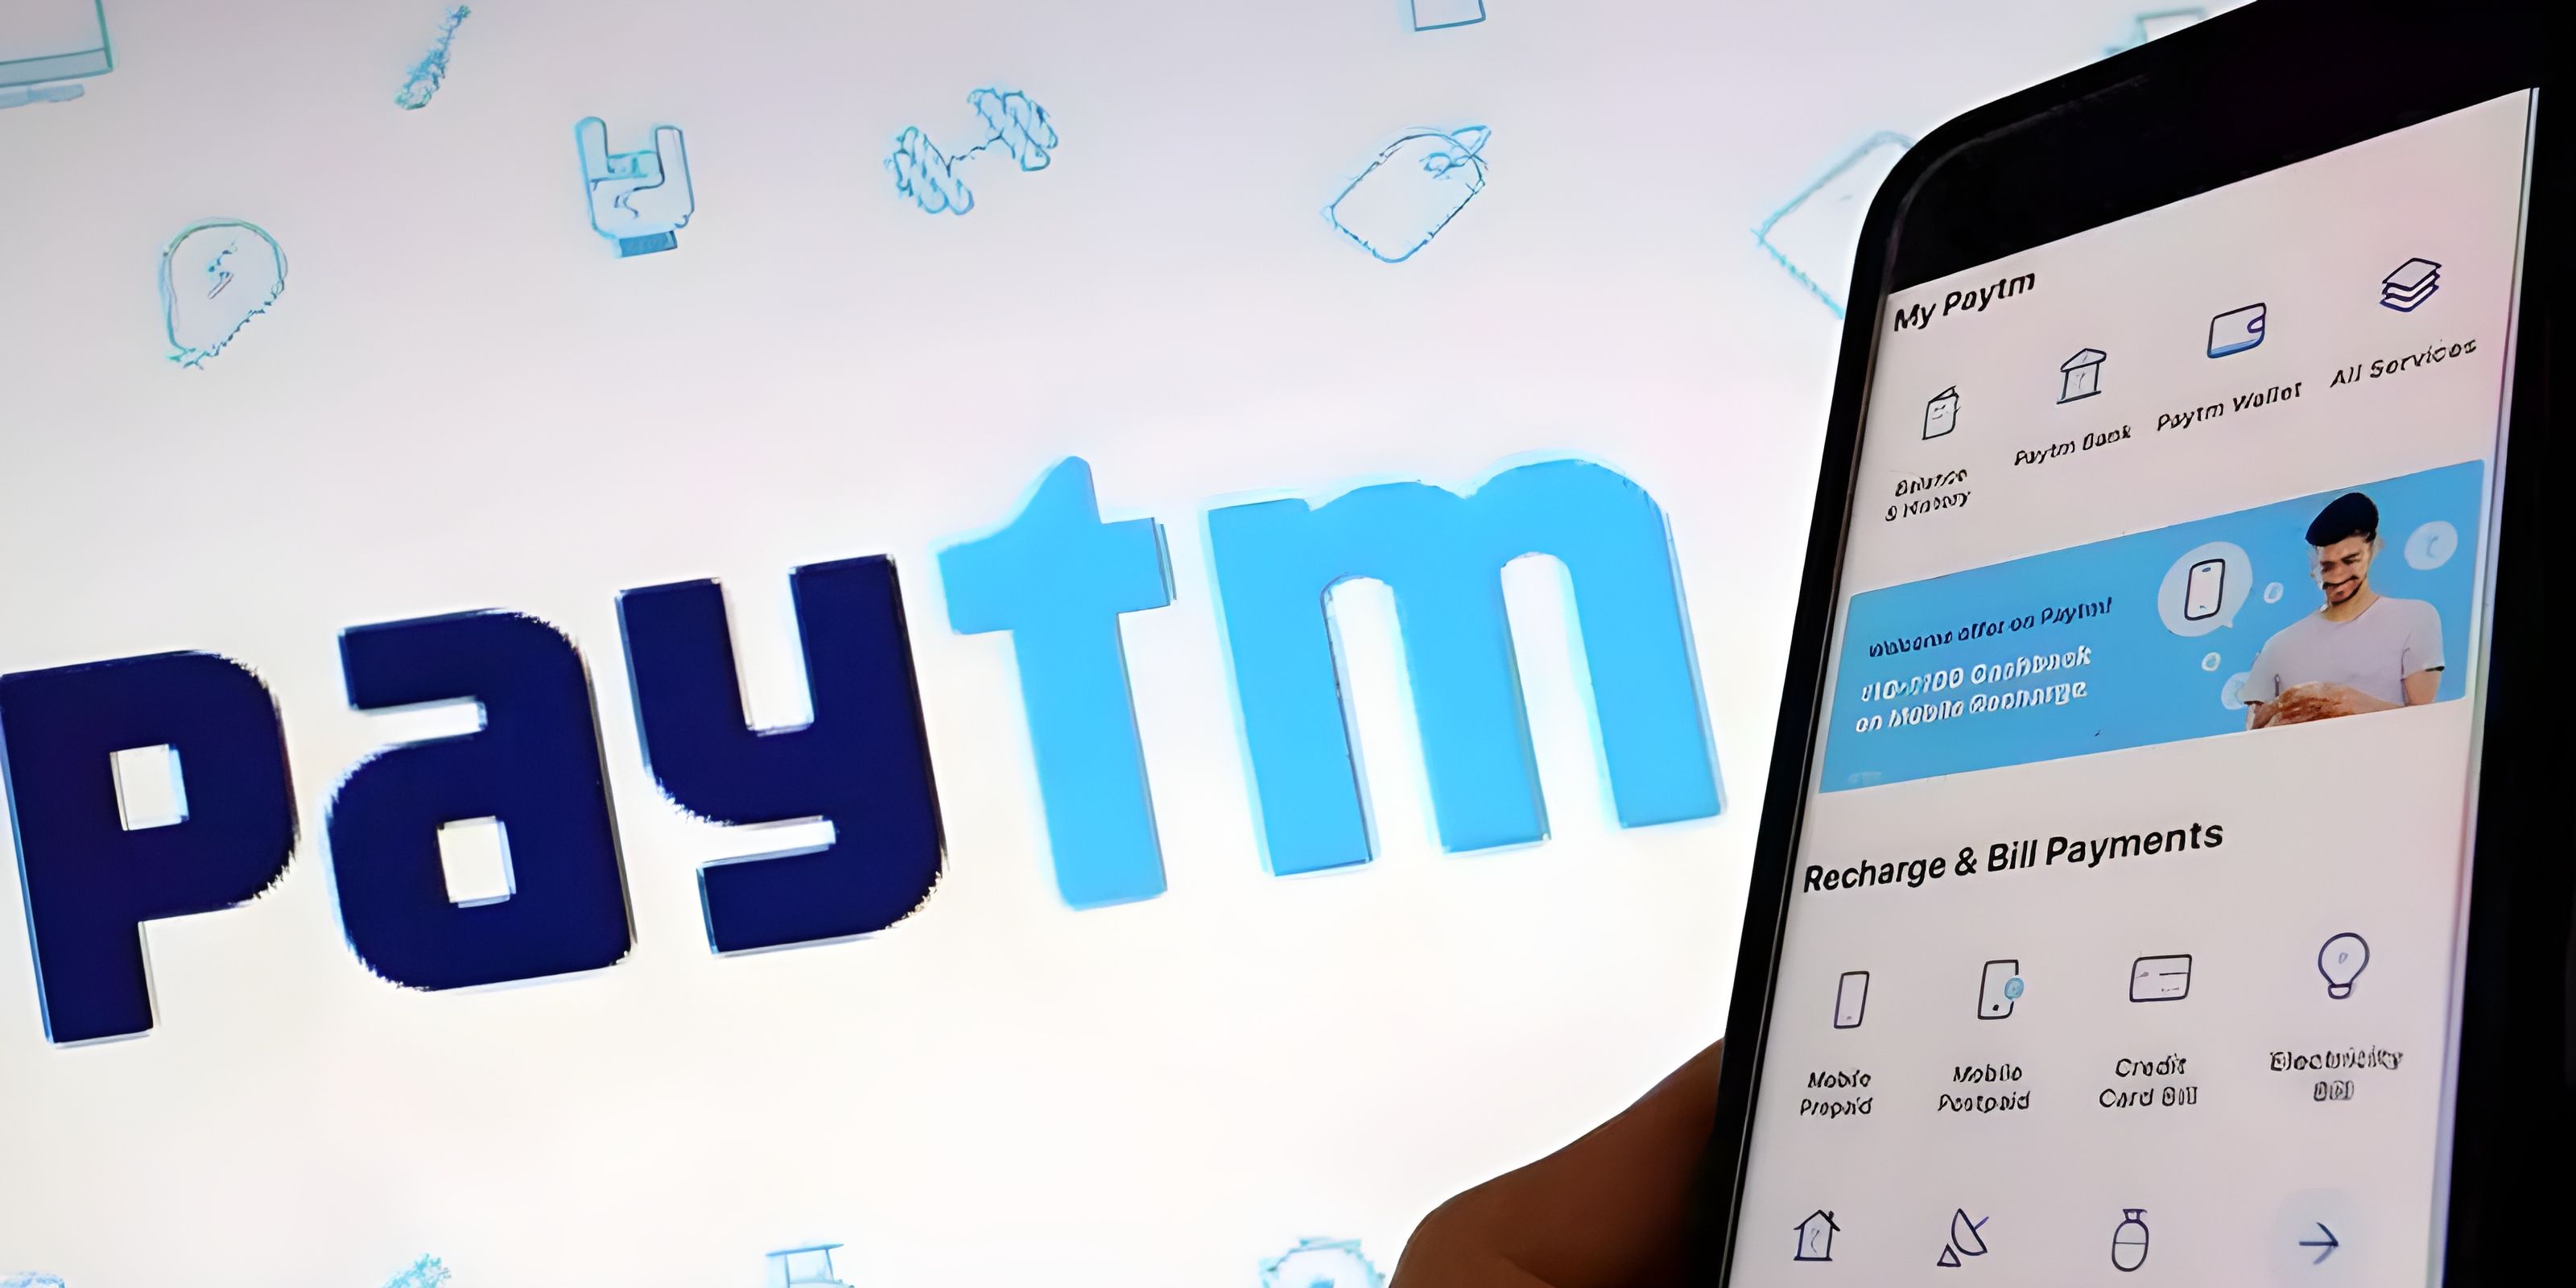 Warren Buffet-led Berkshire Hathaway exits Paytm with Rs 506 Cr loss